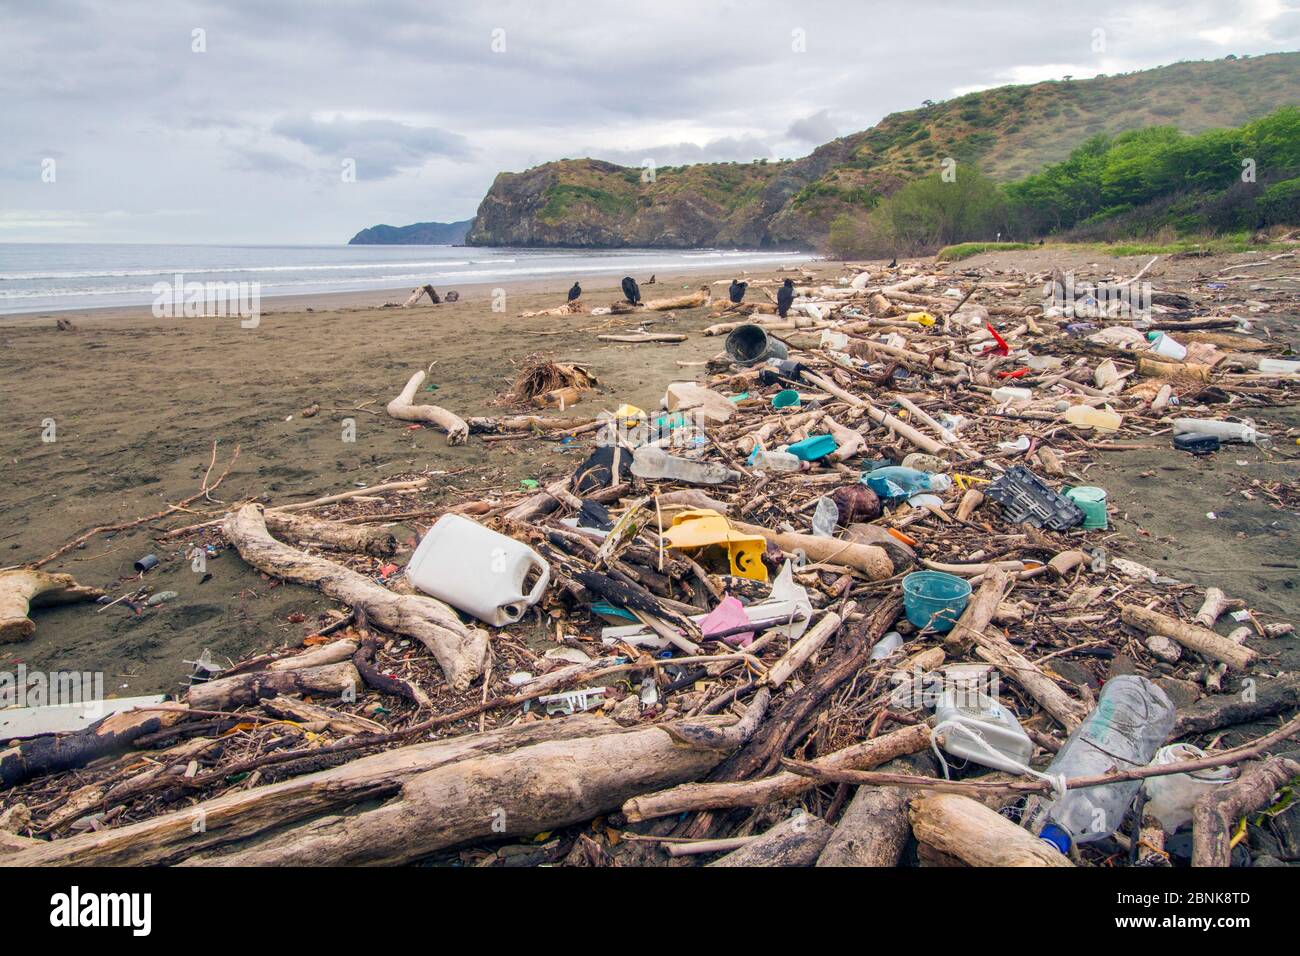 Plastic waste and driftwood washed in on the tide, Nancite Beach, Santa Rosa National Park, Costa Rica. November 2011. Stock Photo